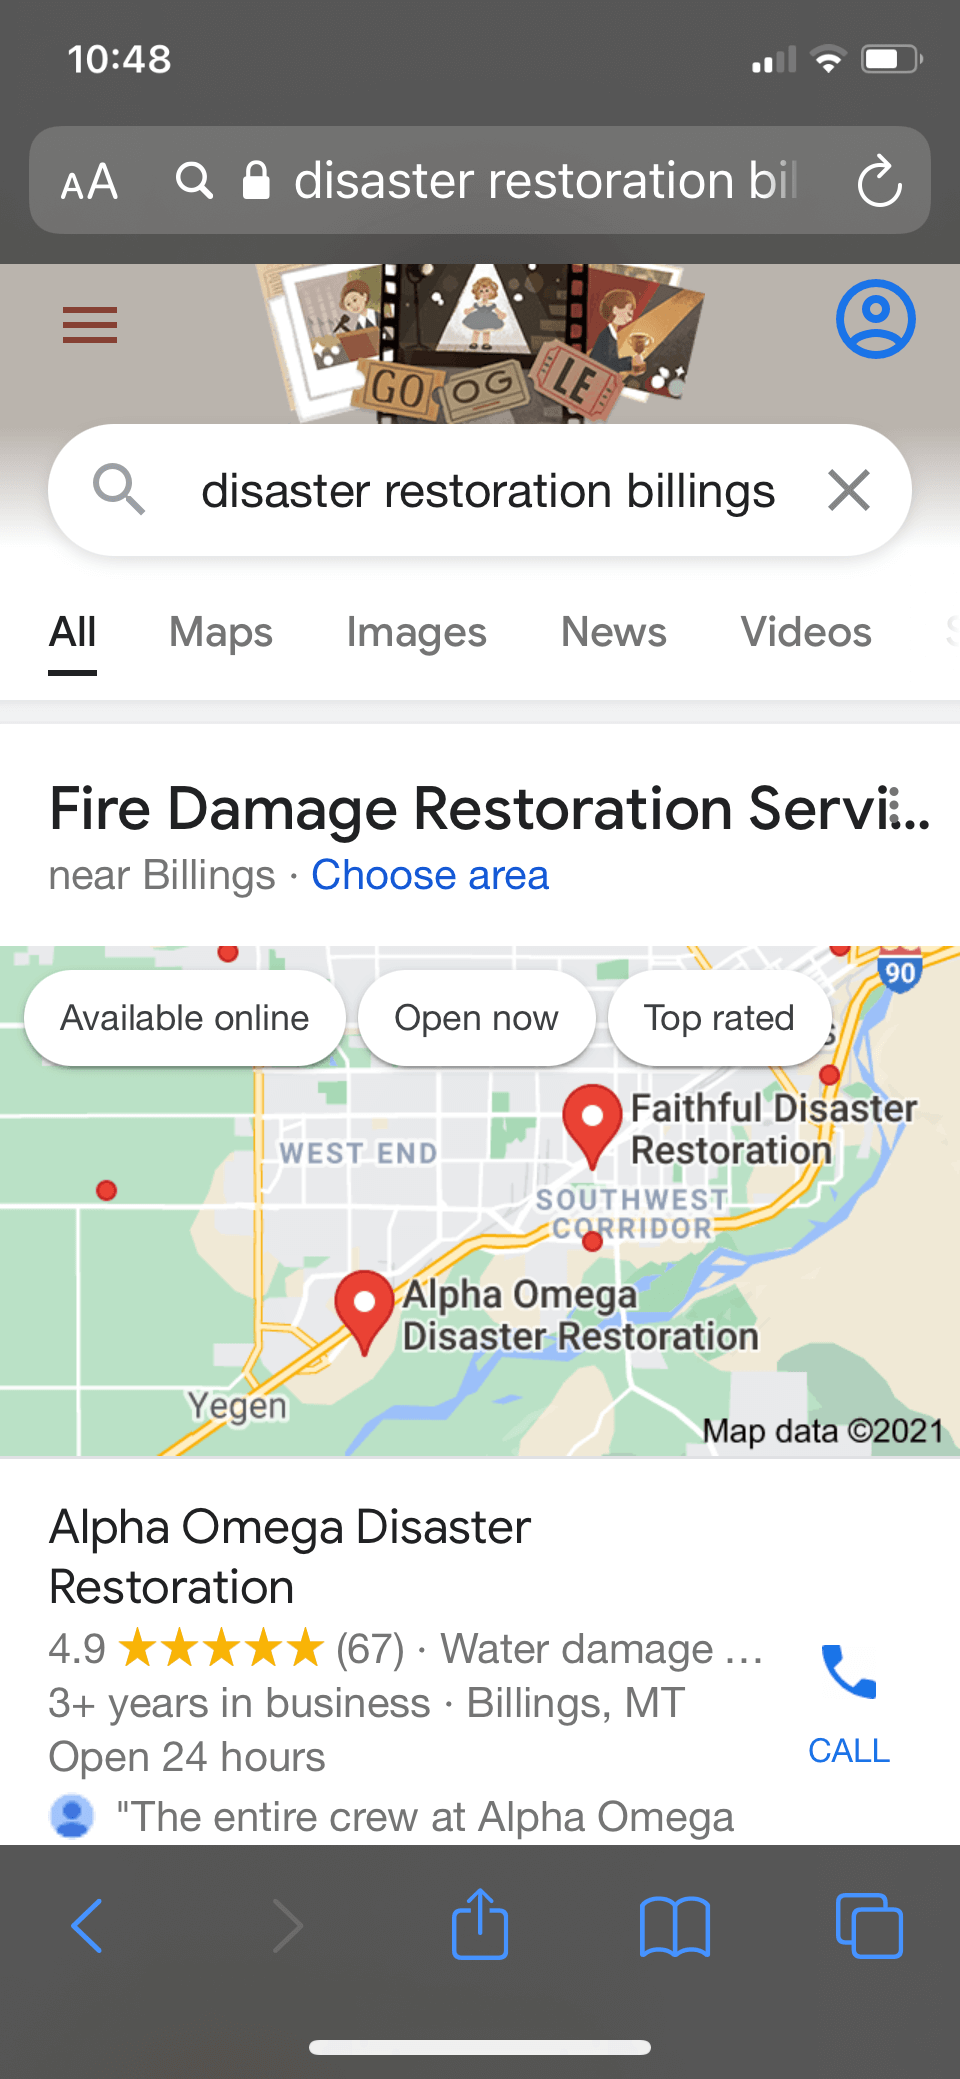 SEO Service for disaster restoration company